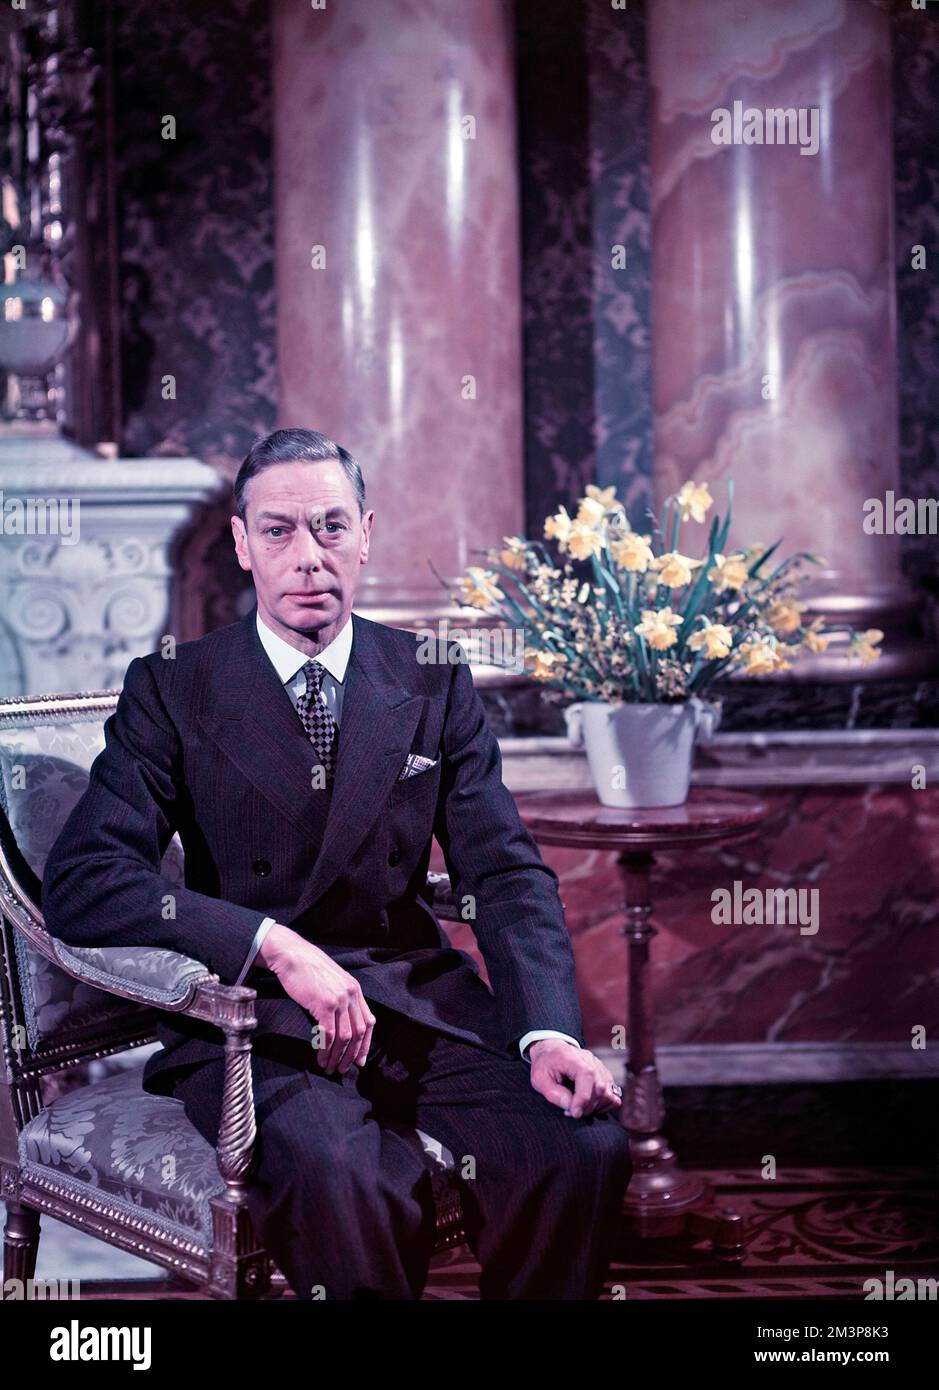 King George VI (1895-1952), King of the United Kingdom (1936-1952) pictured sitting next to a vase of daffodils in his later life     Date:  circa late 1940s Stock Photo